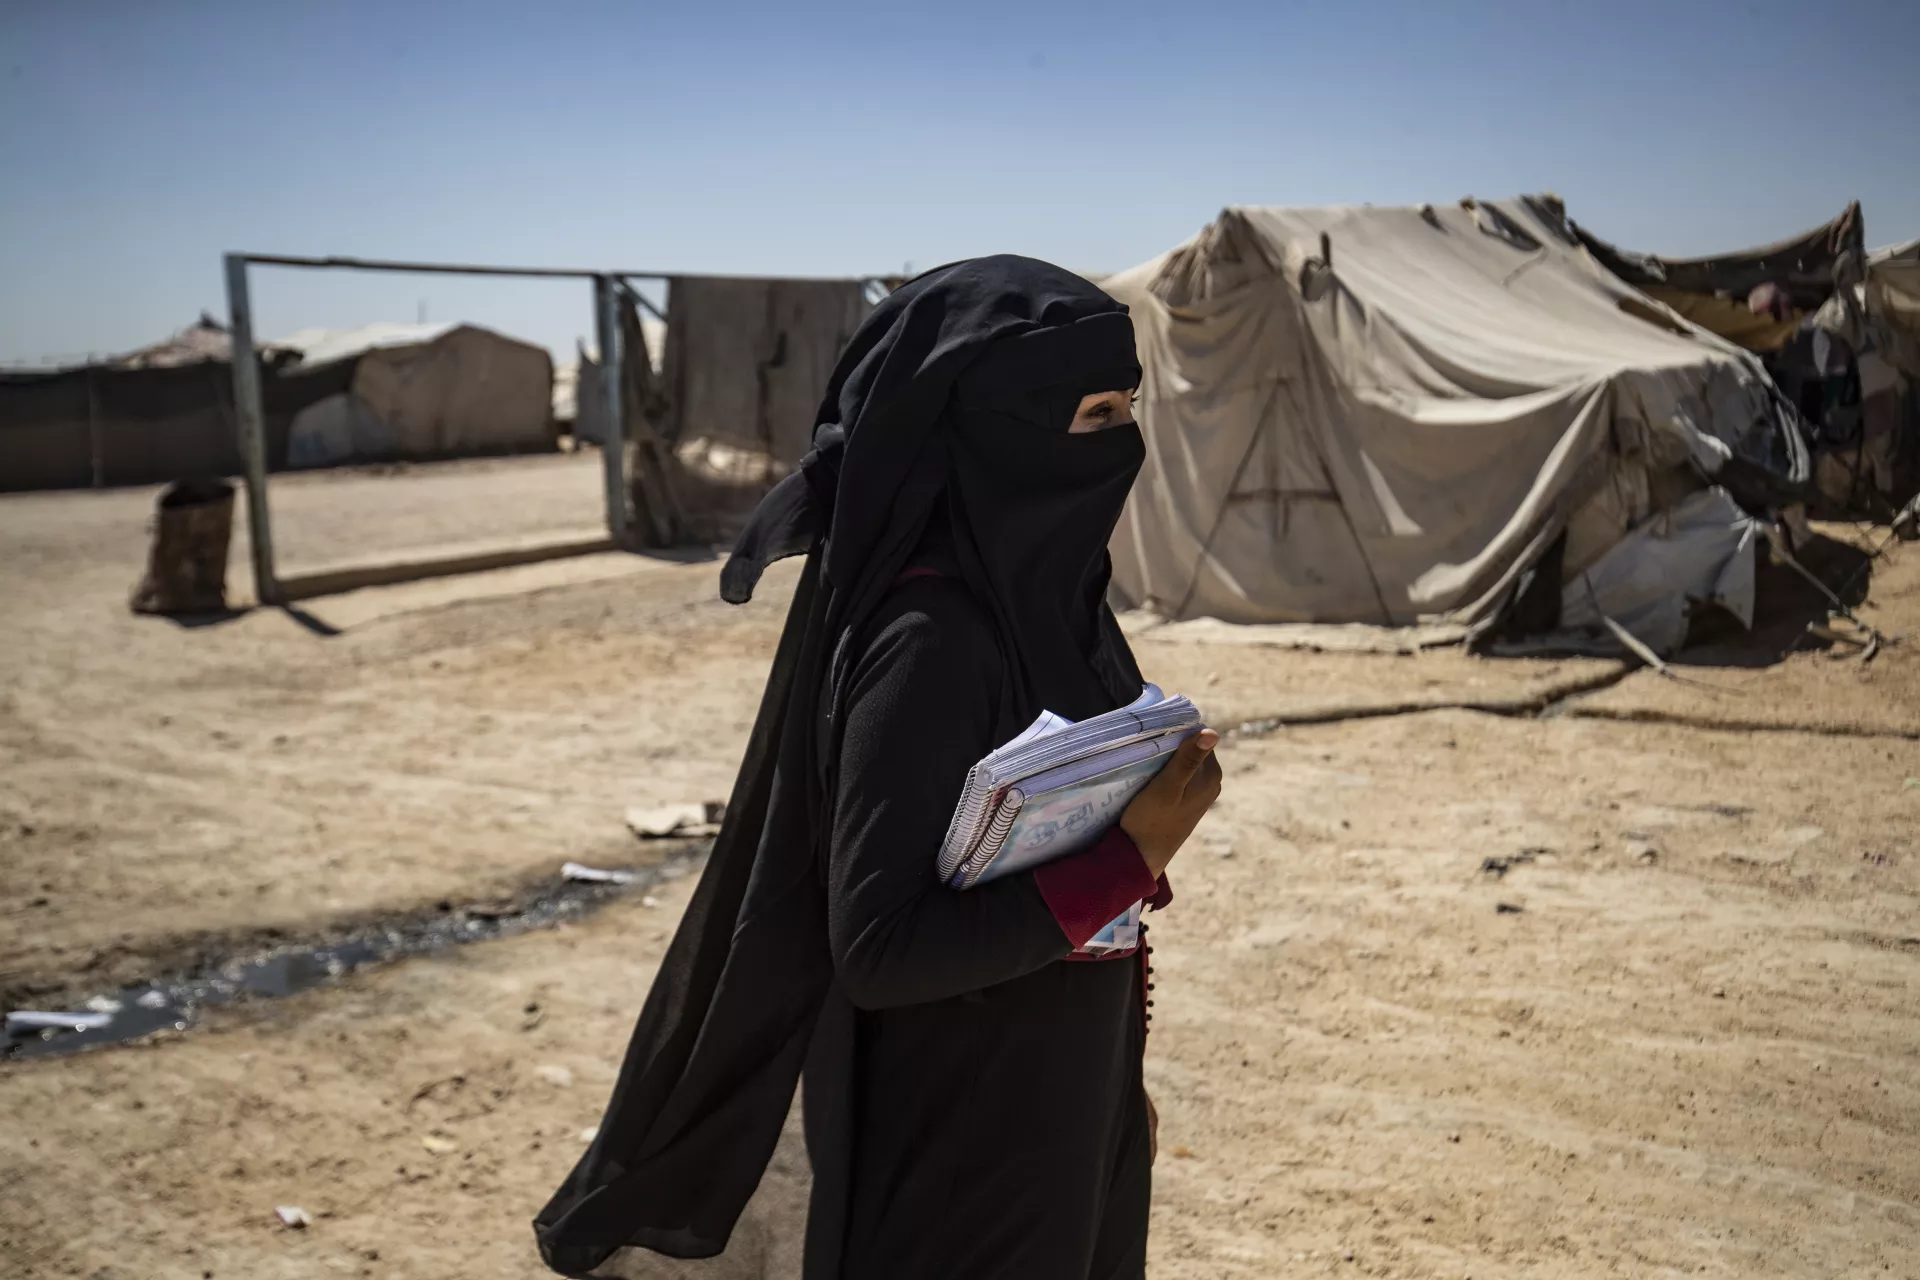 Rima, 19, in Areesheh camp, northeast Syria, going to the exam transportation gathering point, to sit for her Grade 12 national exams in Al-Haskah city.